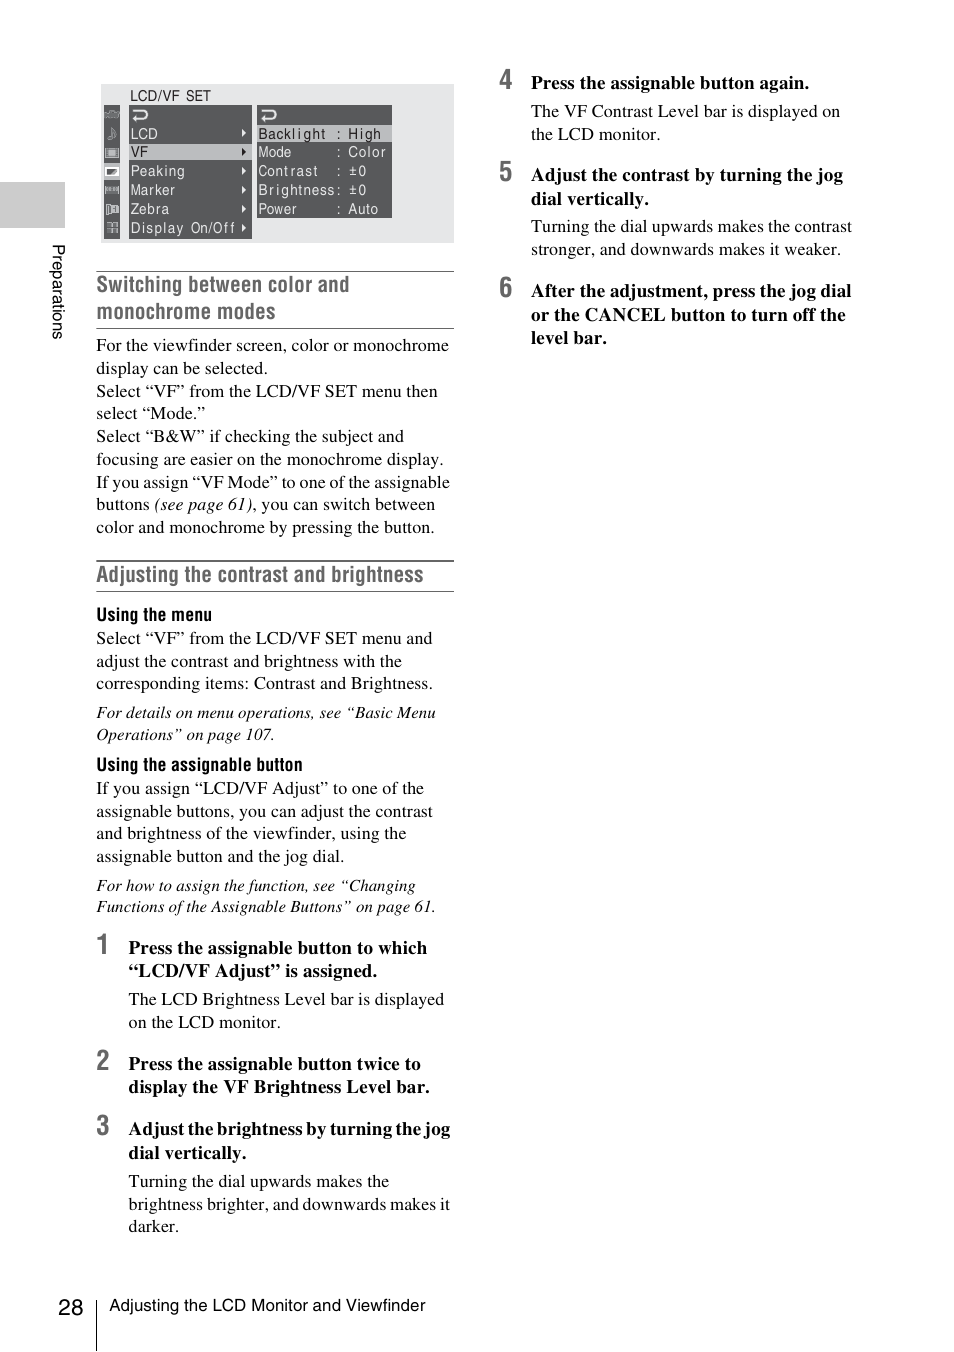 Switching between color and monochrome modes, Adjusting the contrast and brightness | Sony PMW-F3K User Manual | Page 28 / 164